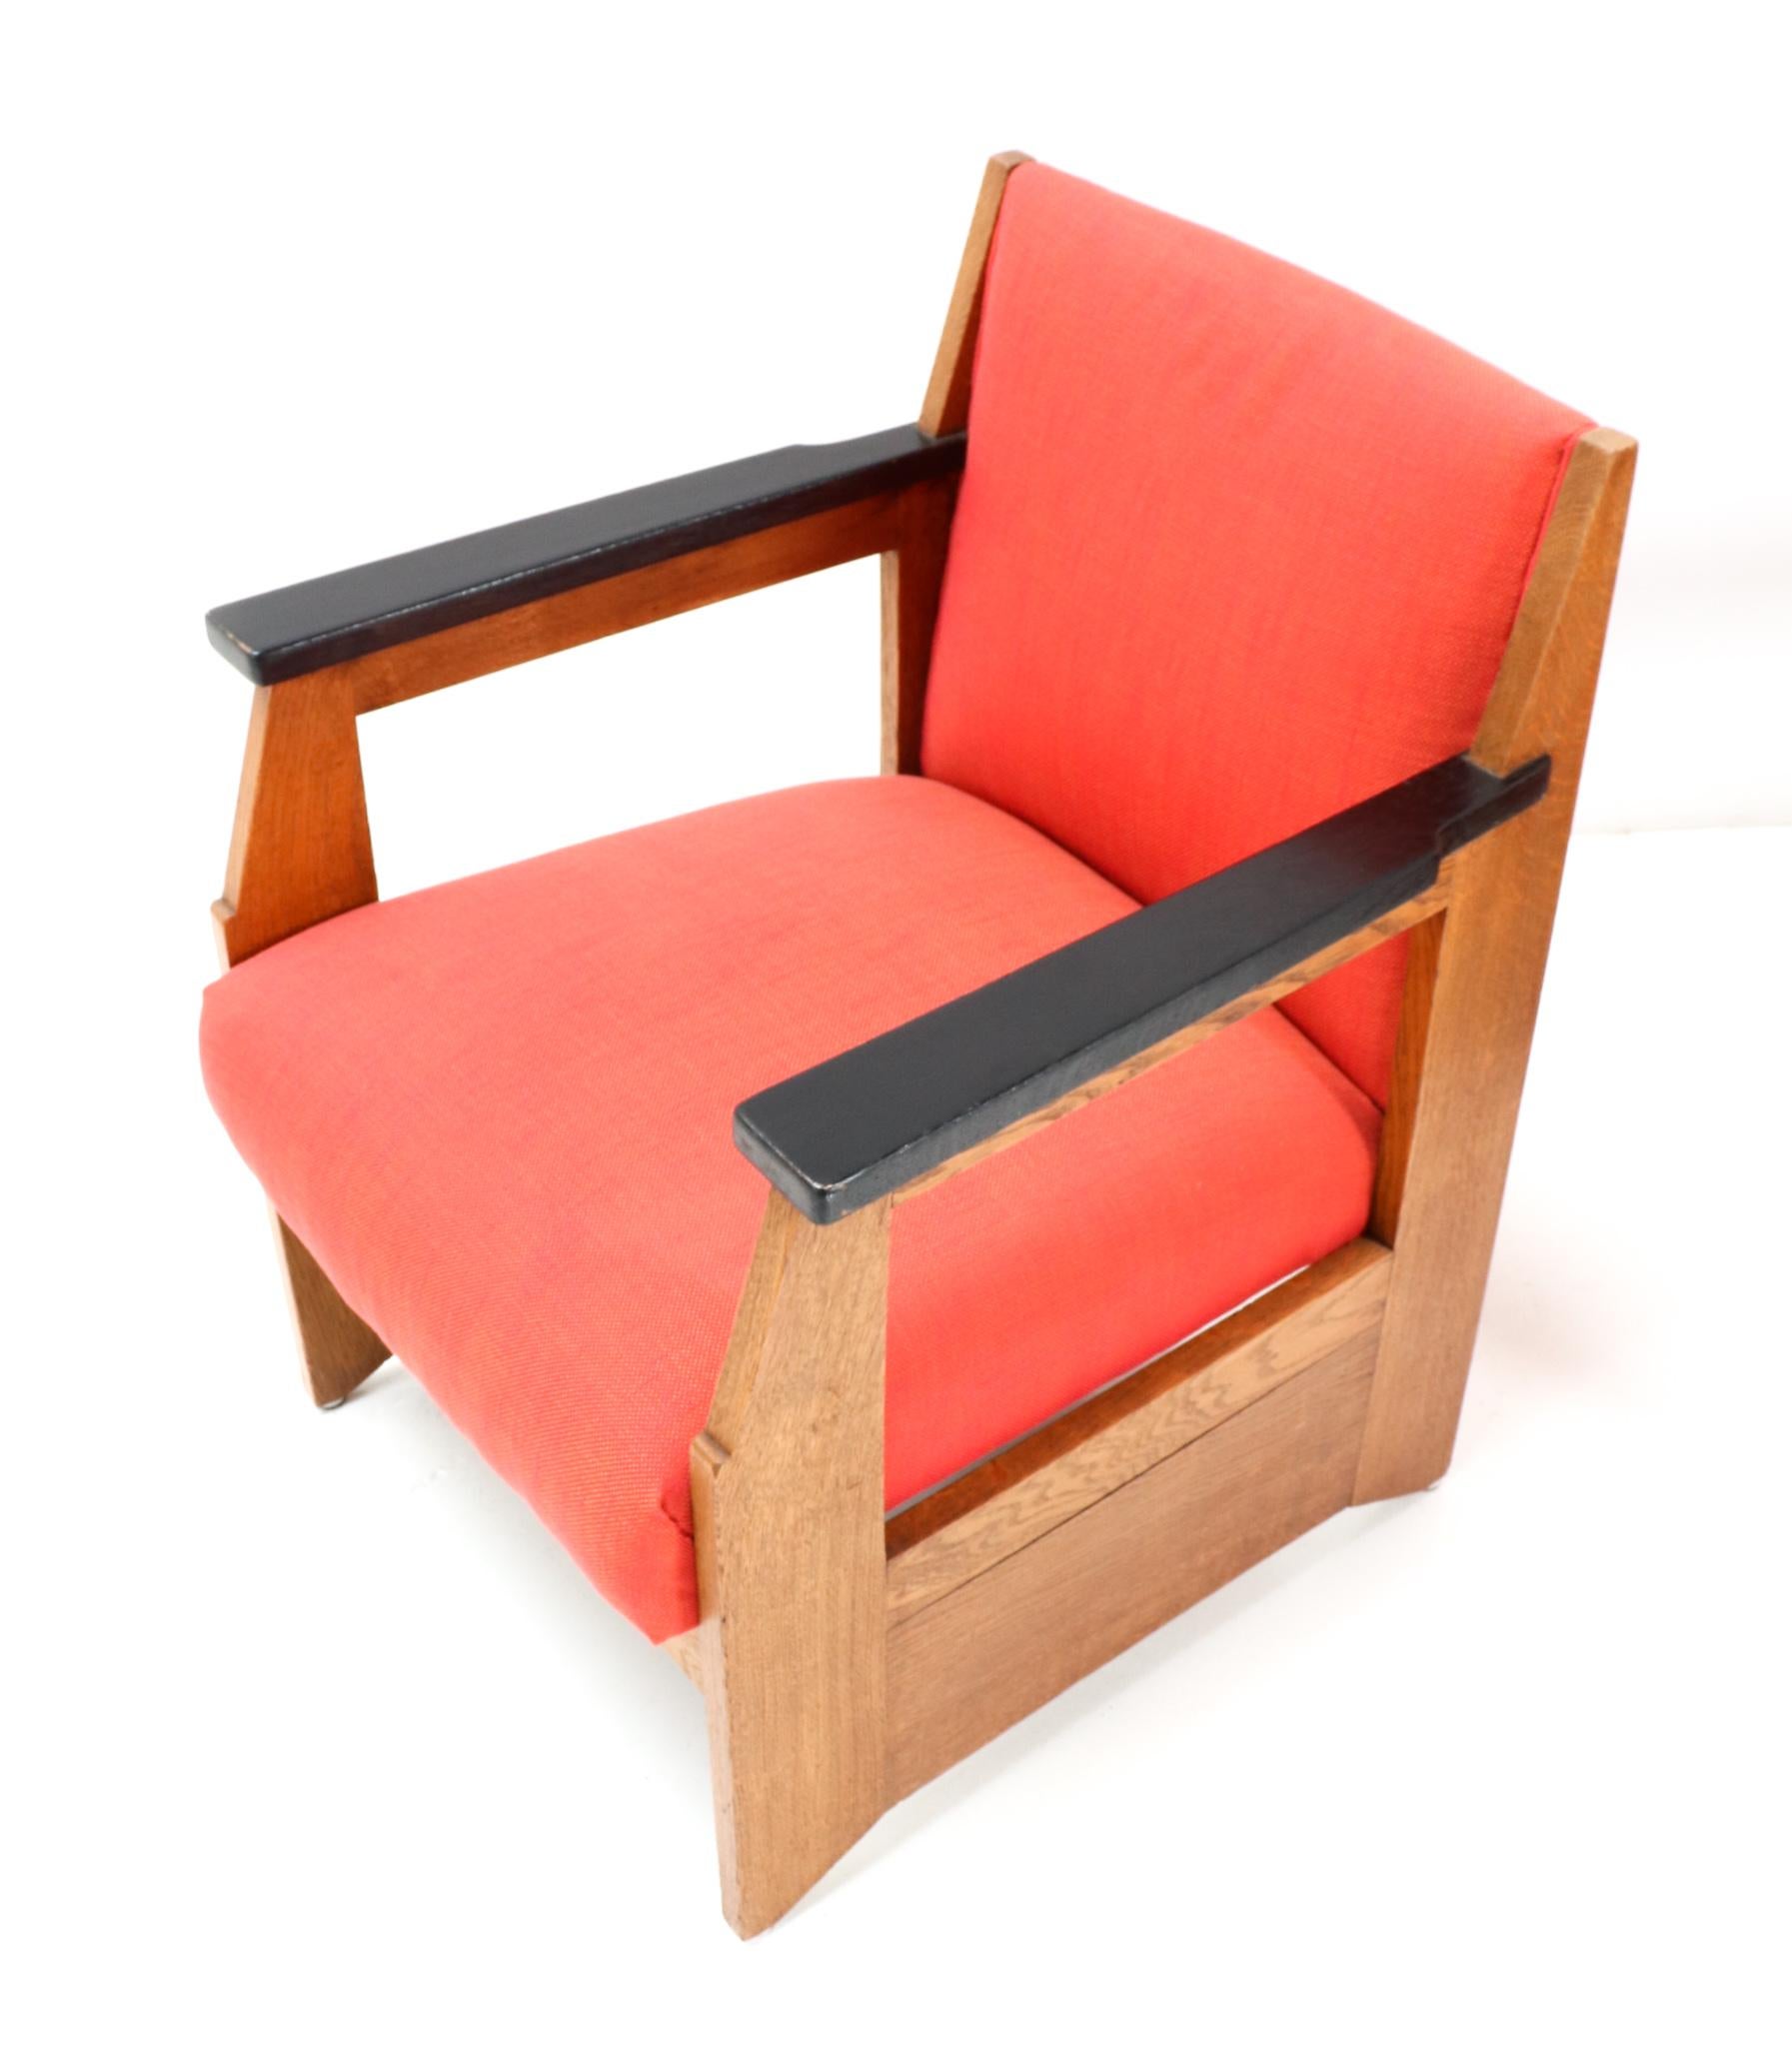 Pair of Oak Art Deco Modernist Easy Chairs by Hendrik Wouda for Pander, 1924 For Sale 5